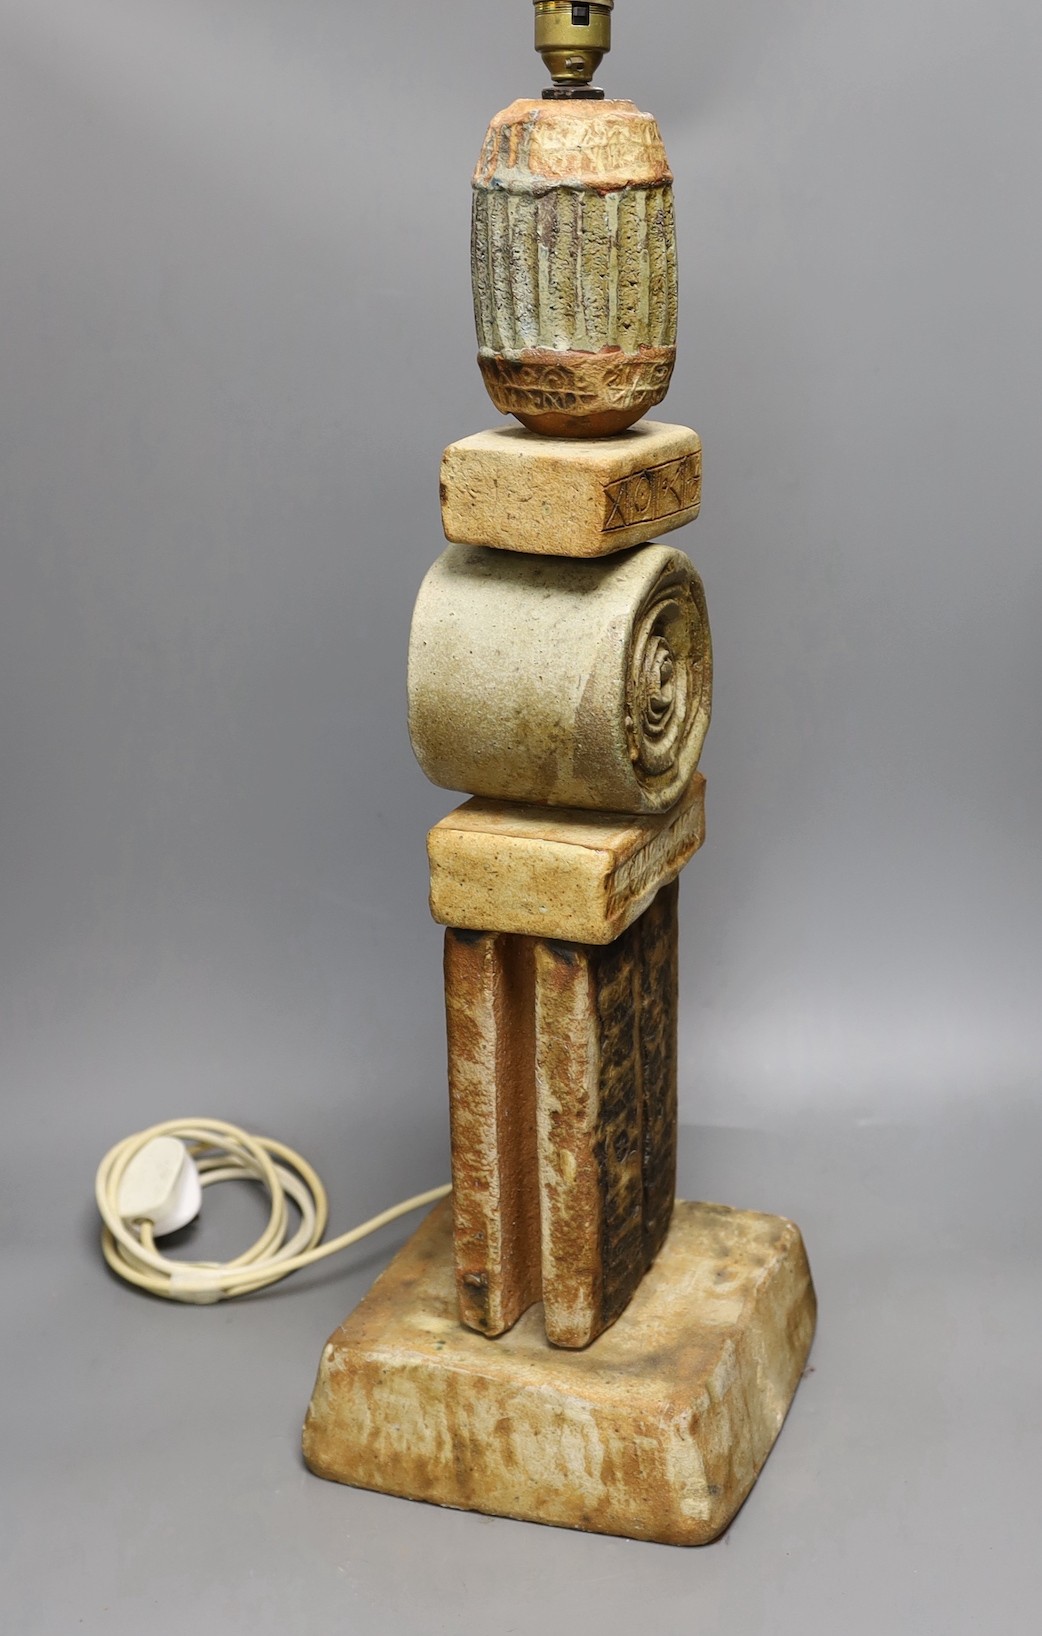 Bernard Rooke (b.1938), Studio pottery Totem floor lamp, Stoneware, originally purchased from Heal's in 1968, 58cm excl. light fitting